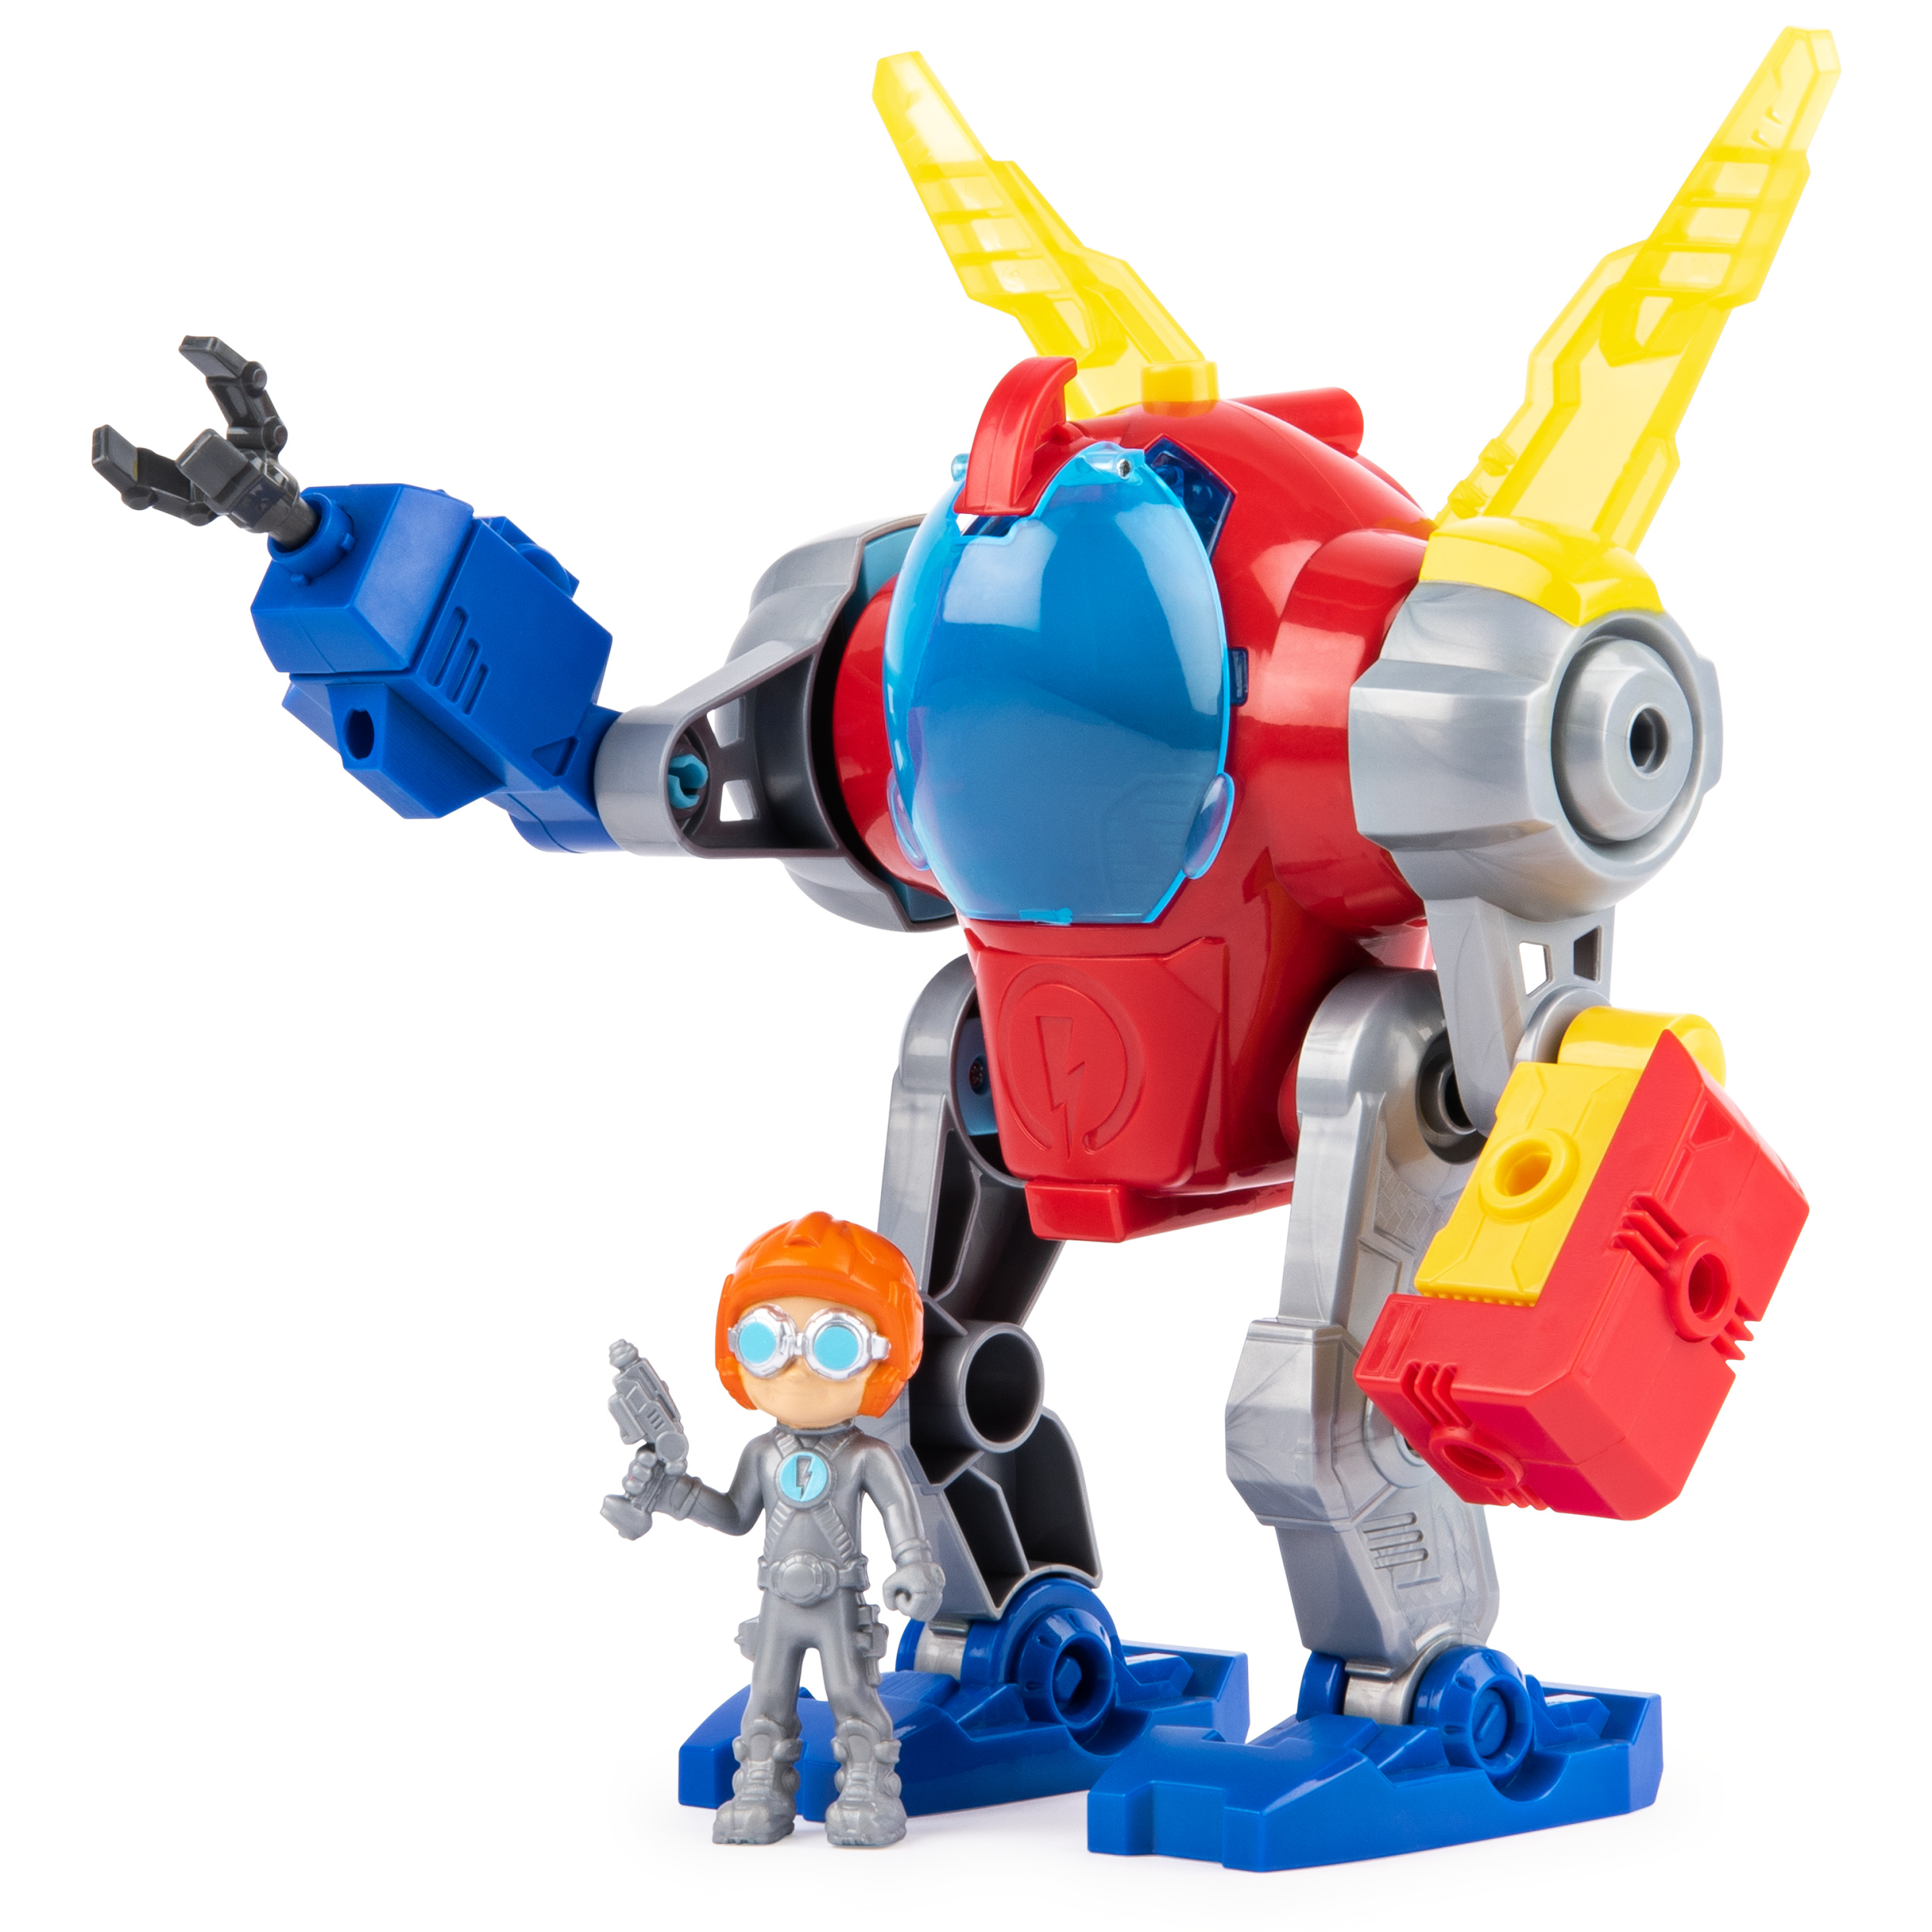 Rusty Rivets, Mechsuit, Snap'n Build Construction with Lights, Sounds, and Rusty Figure, for Ages 3 and up - image 1 of 8